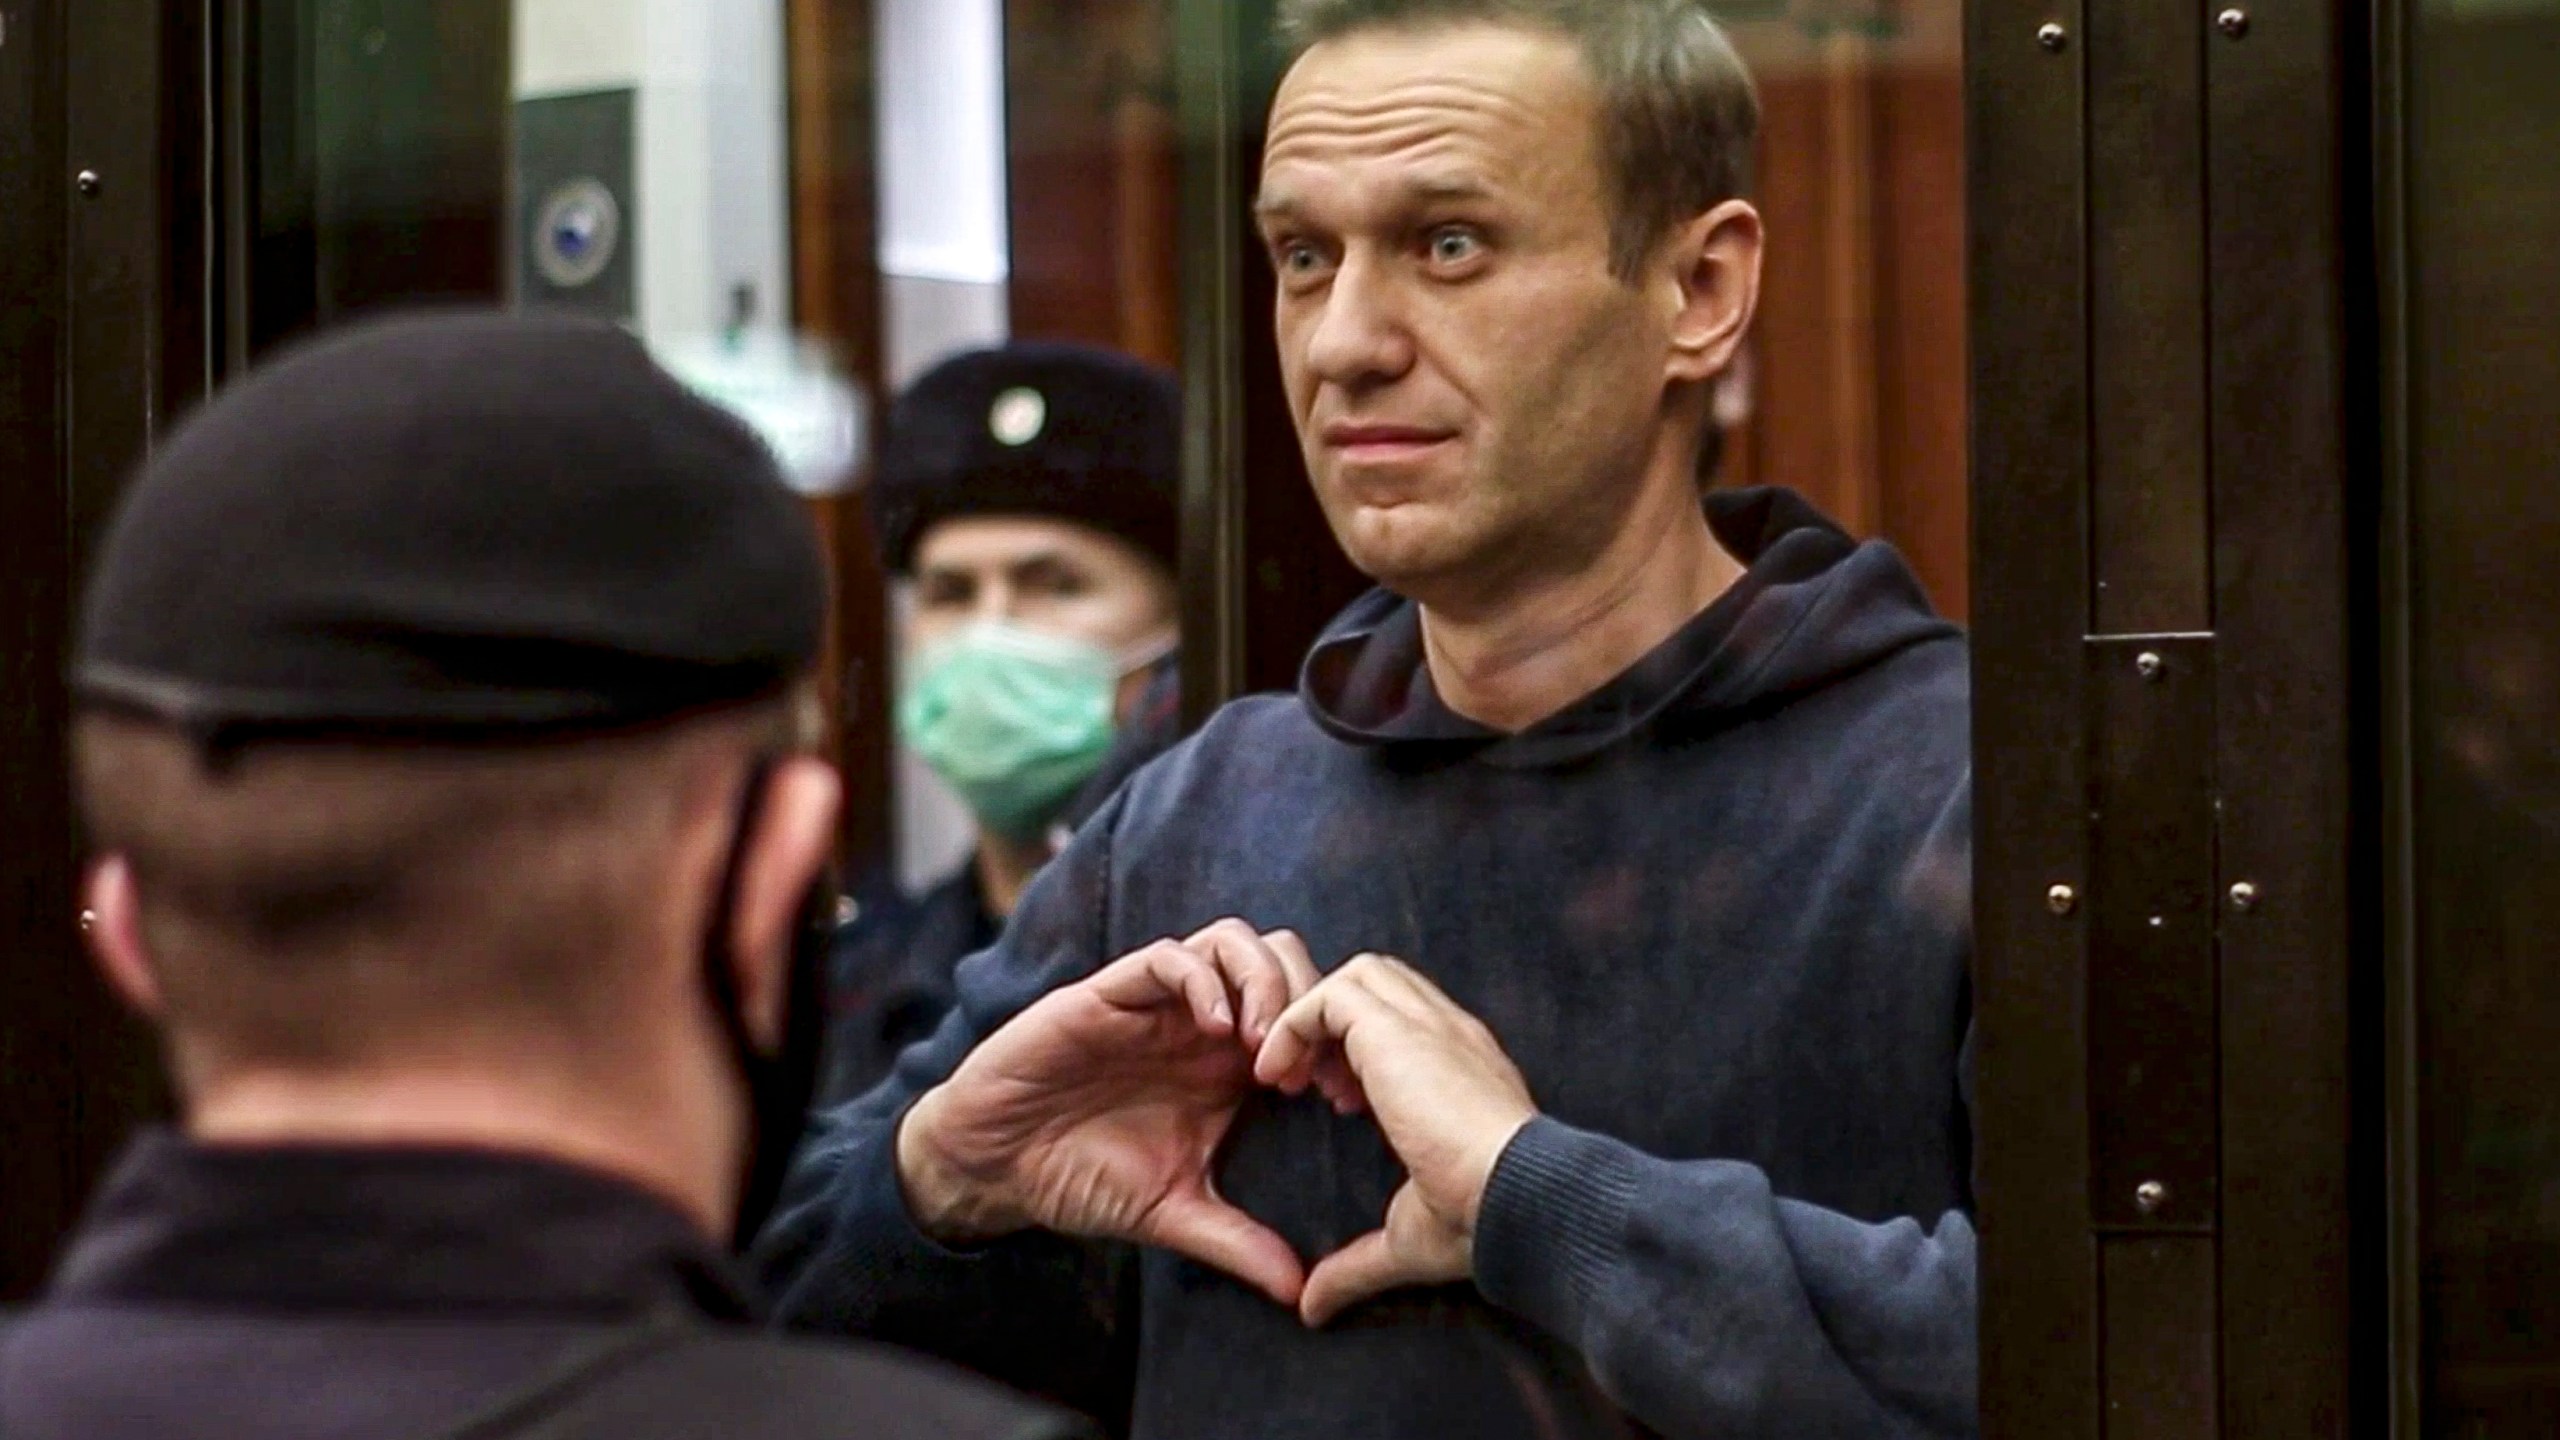 FILE - In this handout photo taken from video provided by the Moscow City Court on Feb. 2, 2021, Russian opposition leader Alexei Navalny shows a heart symbol while standing in a defendants' cage during a hearing in the Moscow City Court in Moscow, Russia. President Vladimir Putin says he supported an idea to release Navalny in a prisoner exchange just days before the man who was his biggest foe died. (Moscow City Court via AP, File)